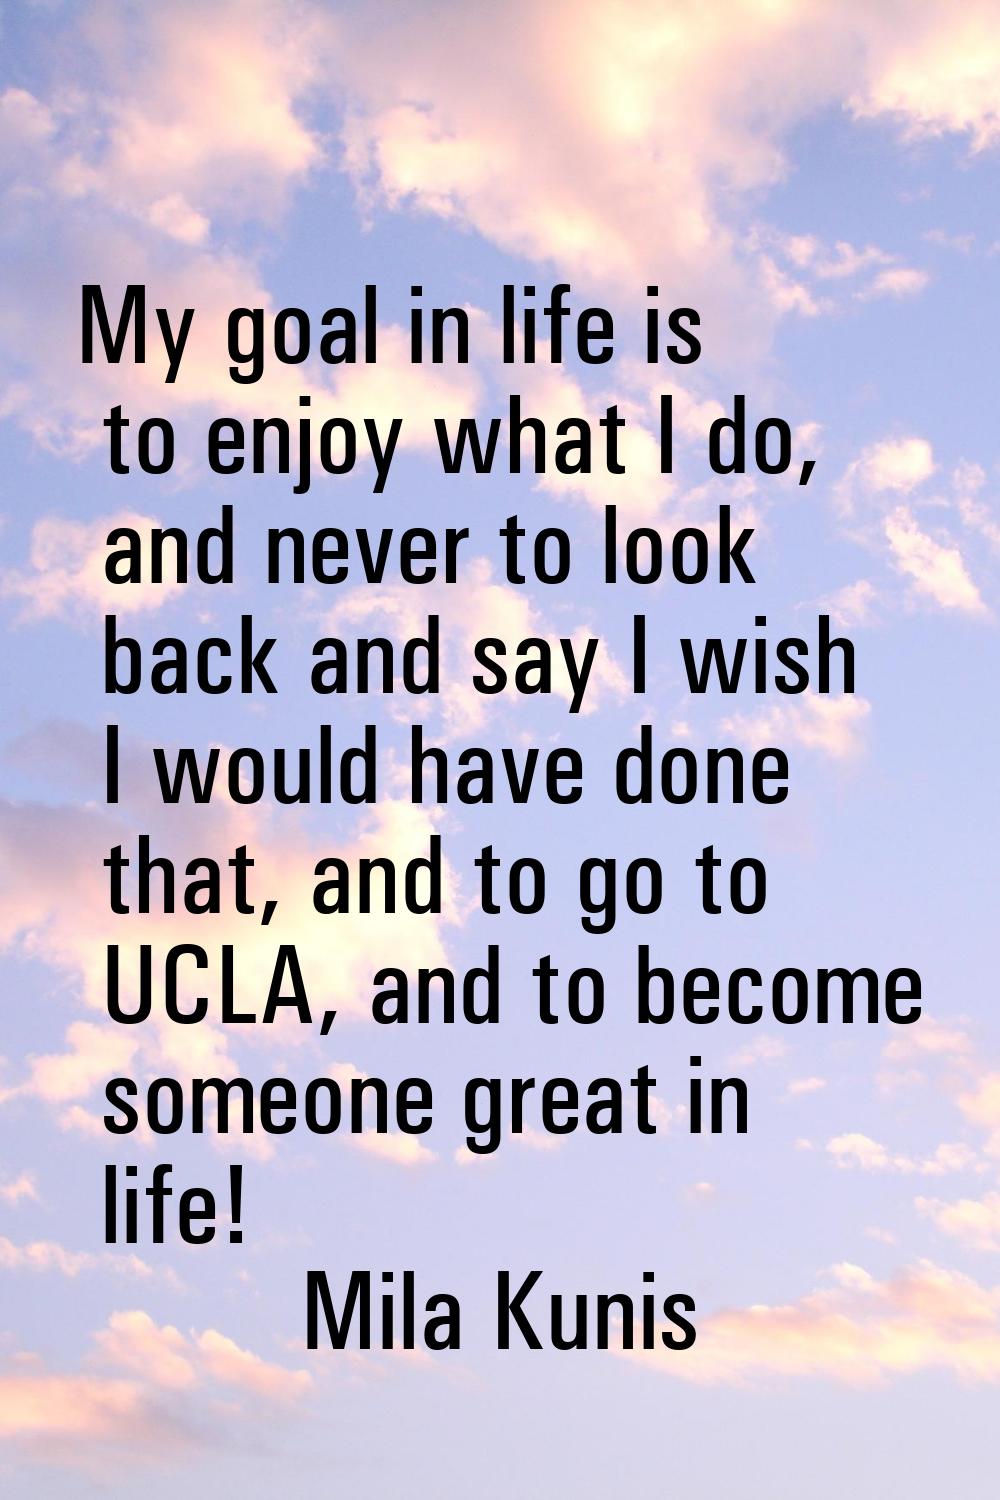 My goal in life is to enjoy what I do, and never to look back and say I wish I would have done that